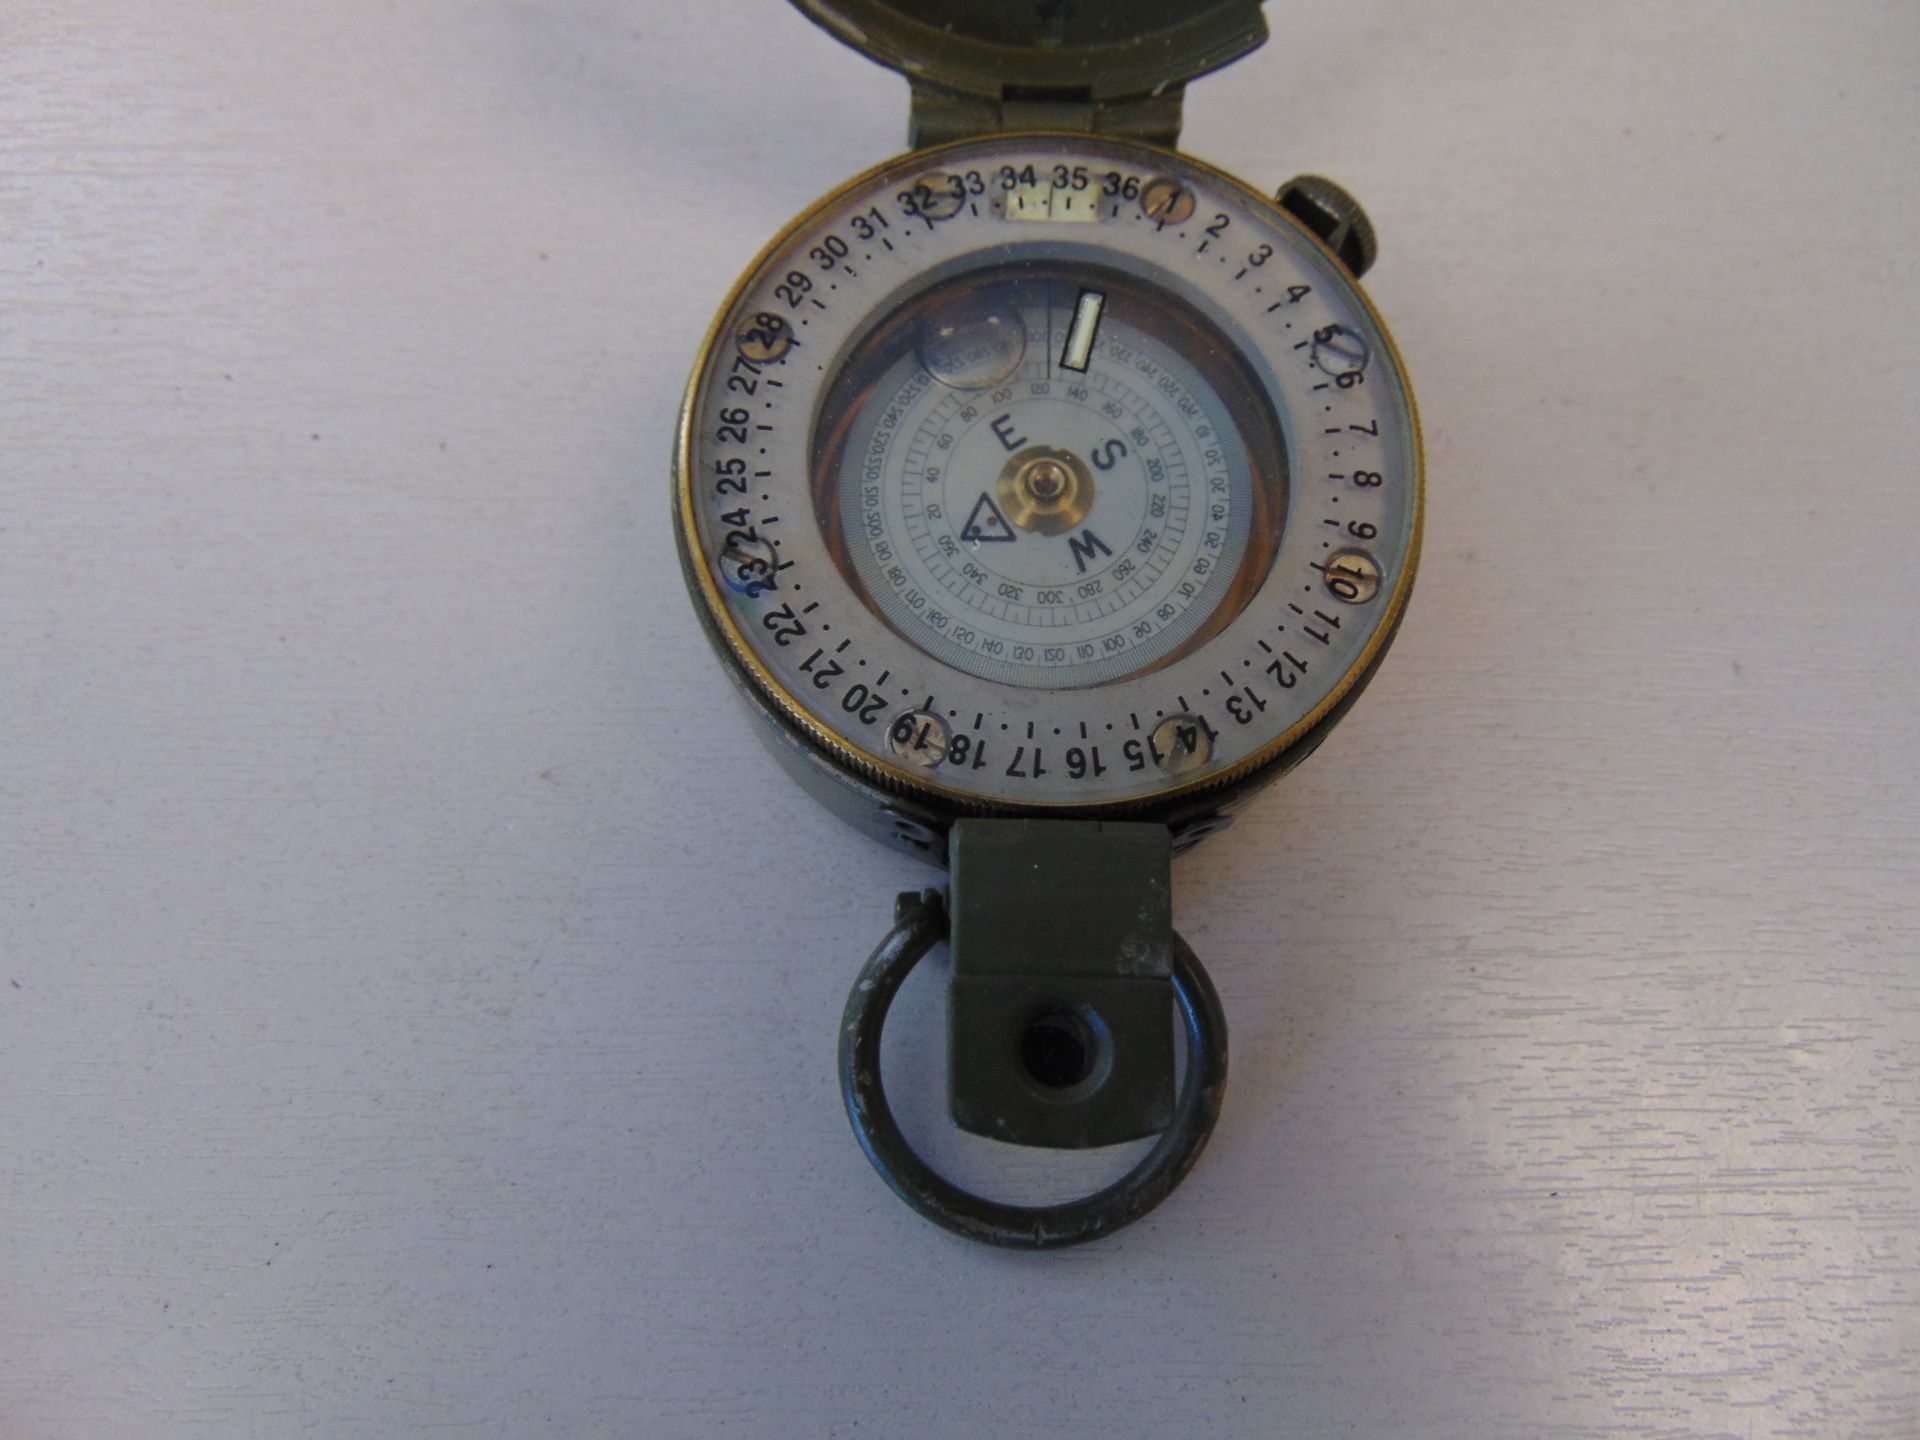 STANLEY LONDON BRITISH ARMY ISSUE BRASS COMPASS IN MILS NATO MARKS - Image 4 of 4